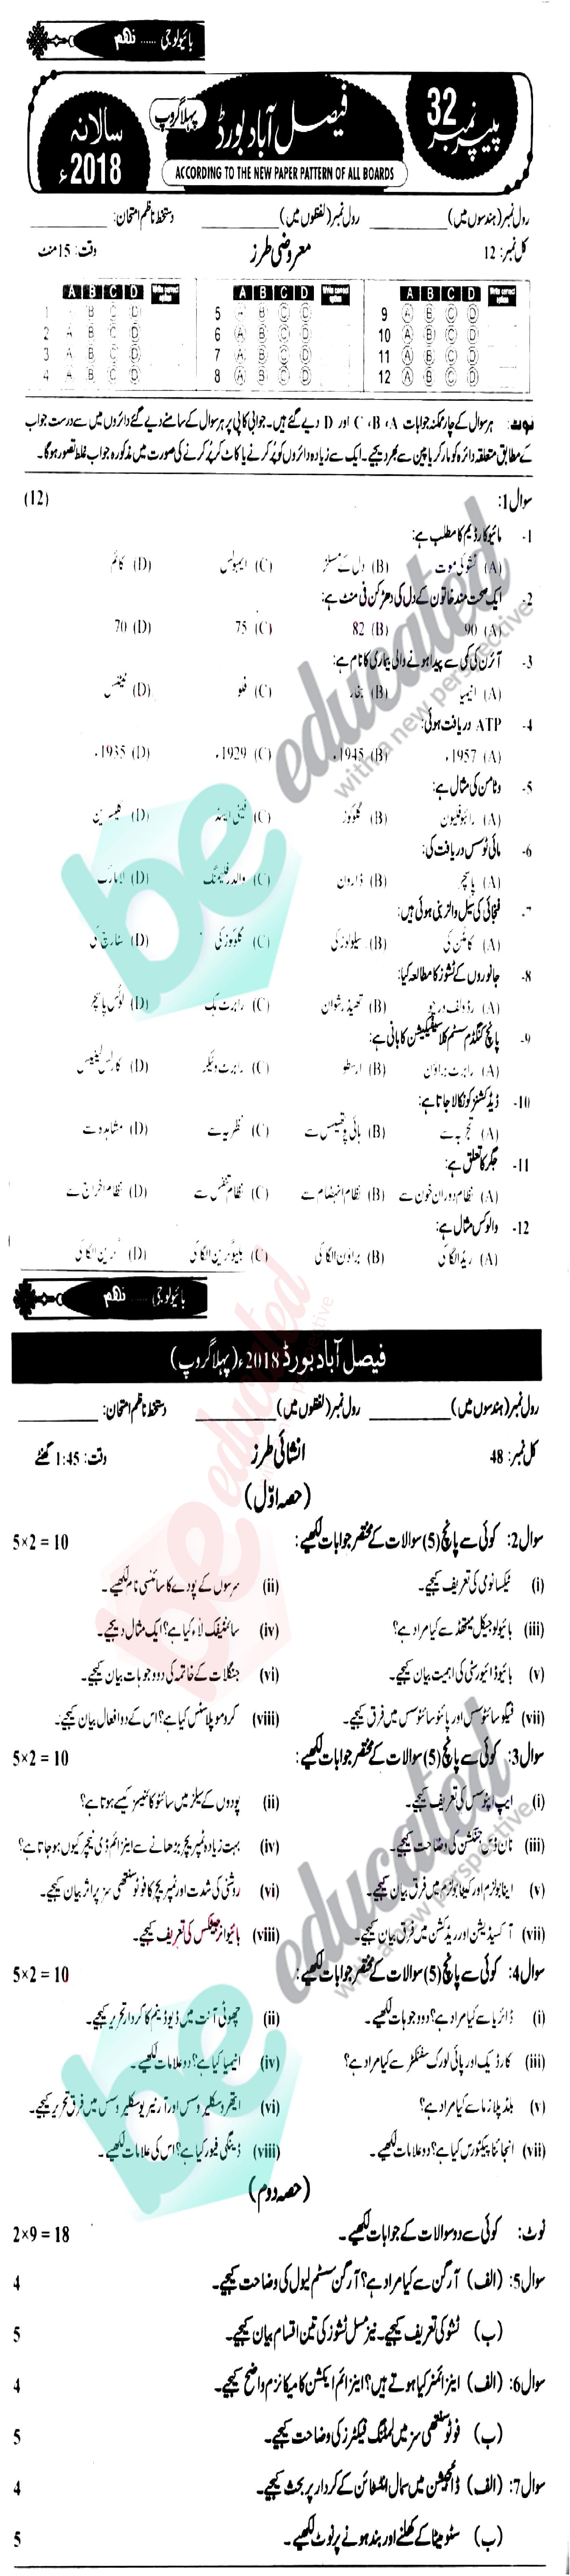 Biology 9th class Past Paper Group 1 BISE Faisalabad 2018